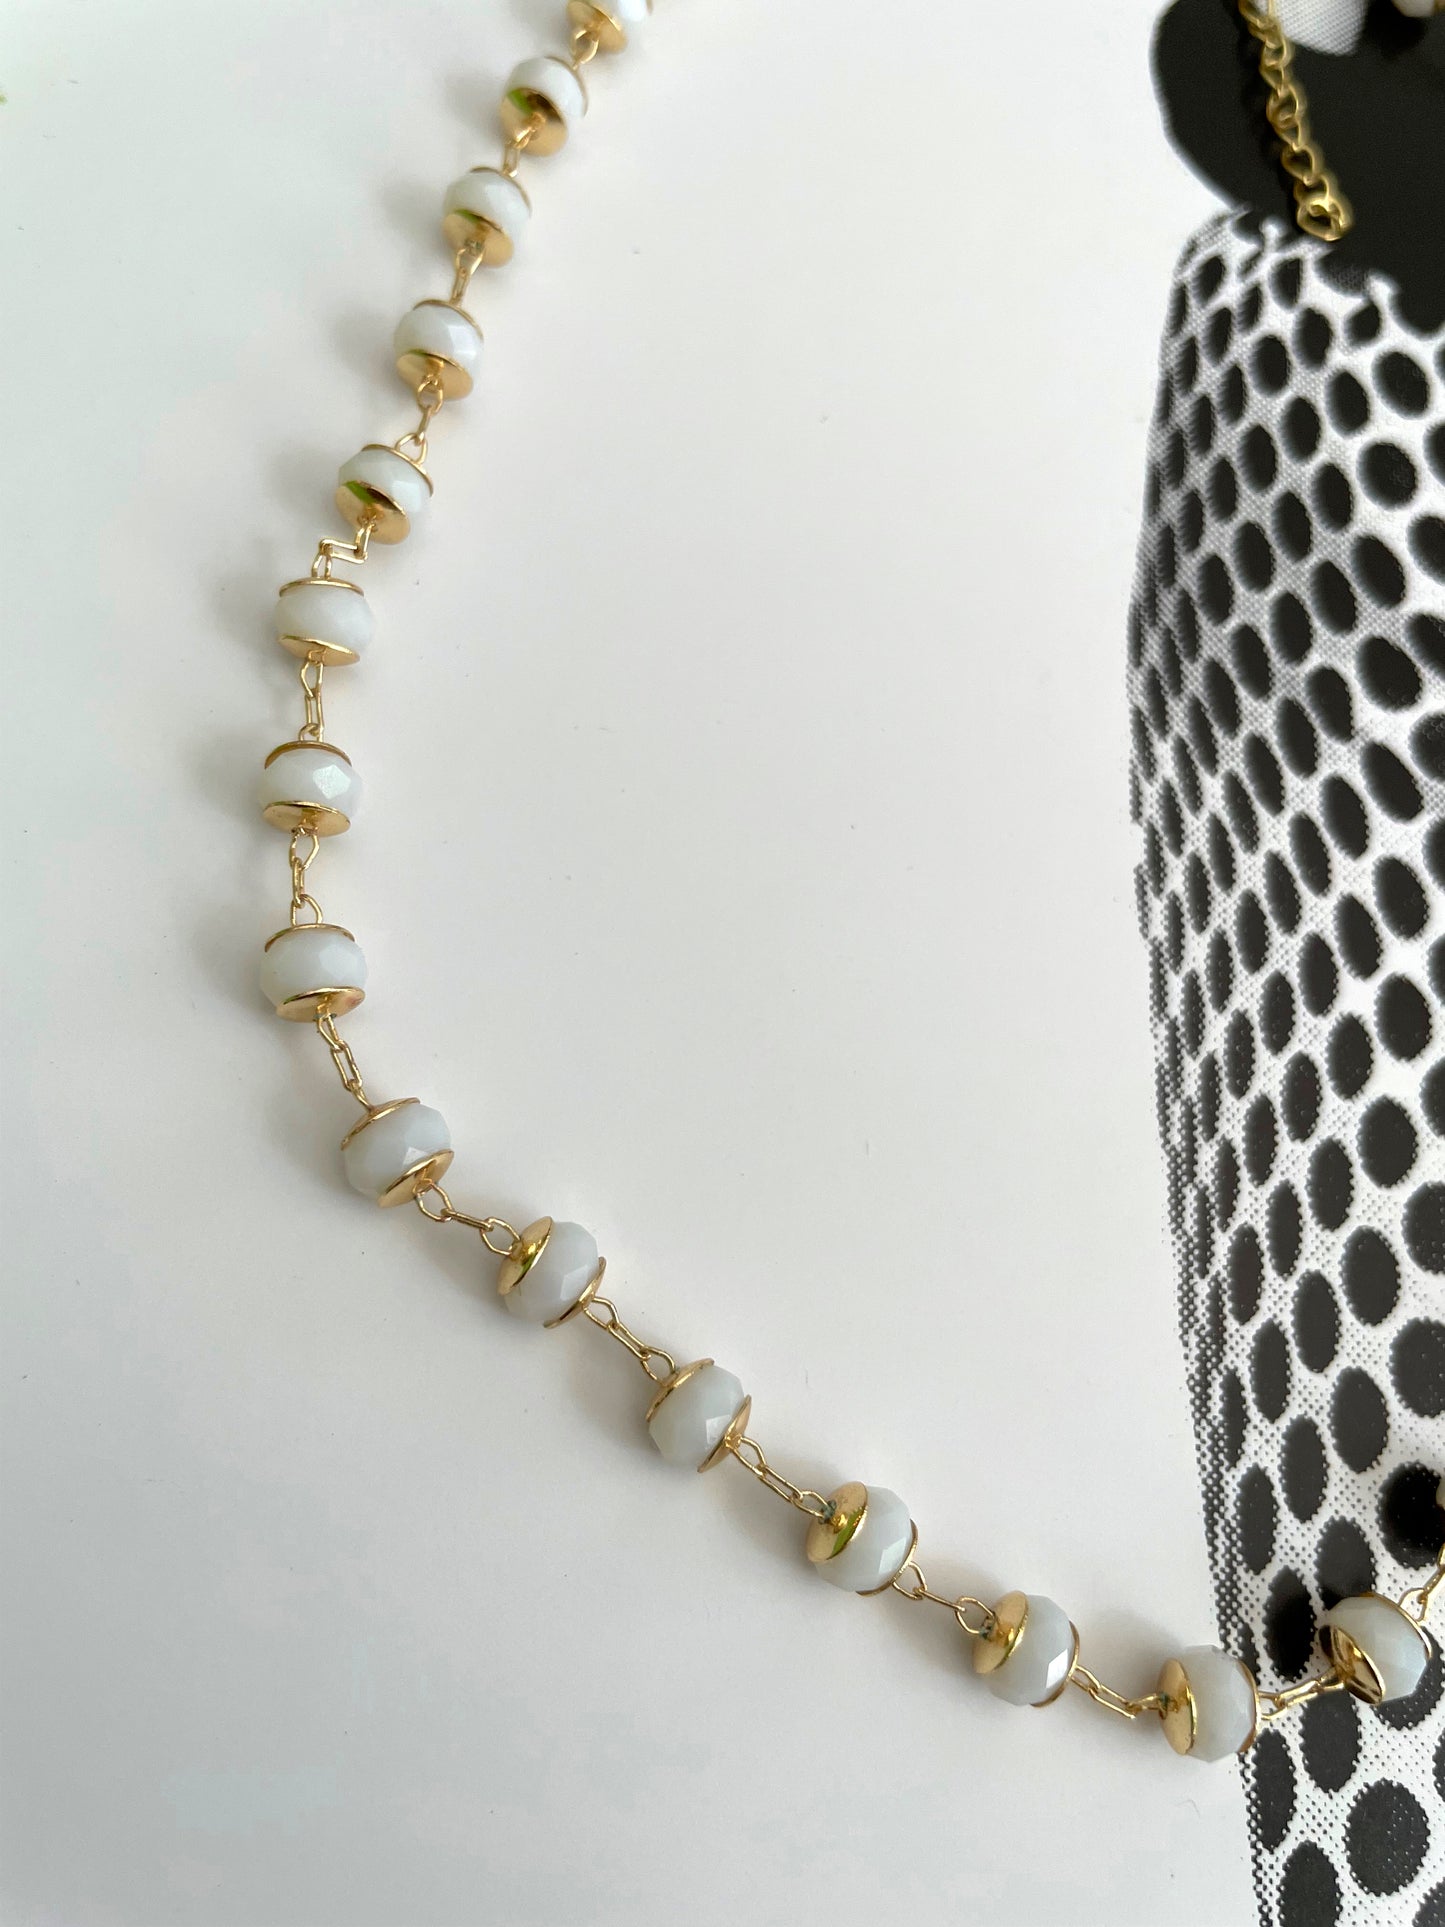 White crystals on gold necklace